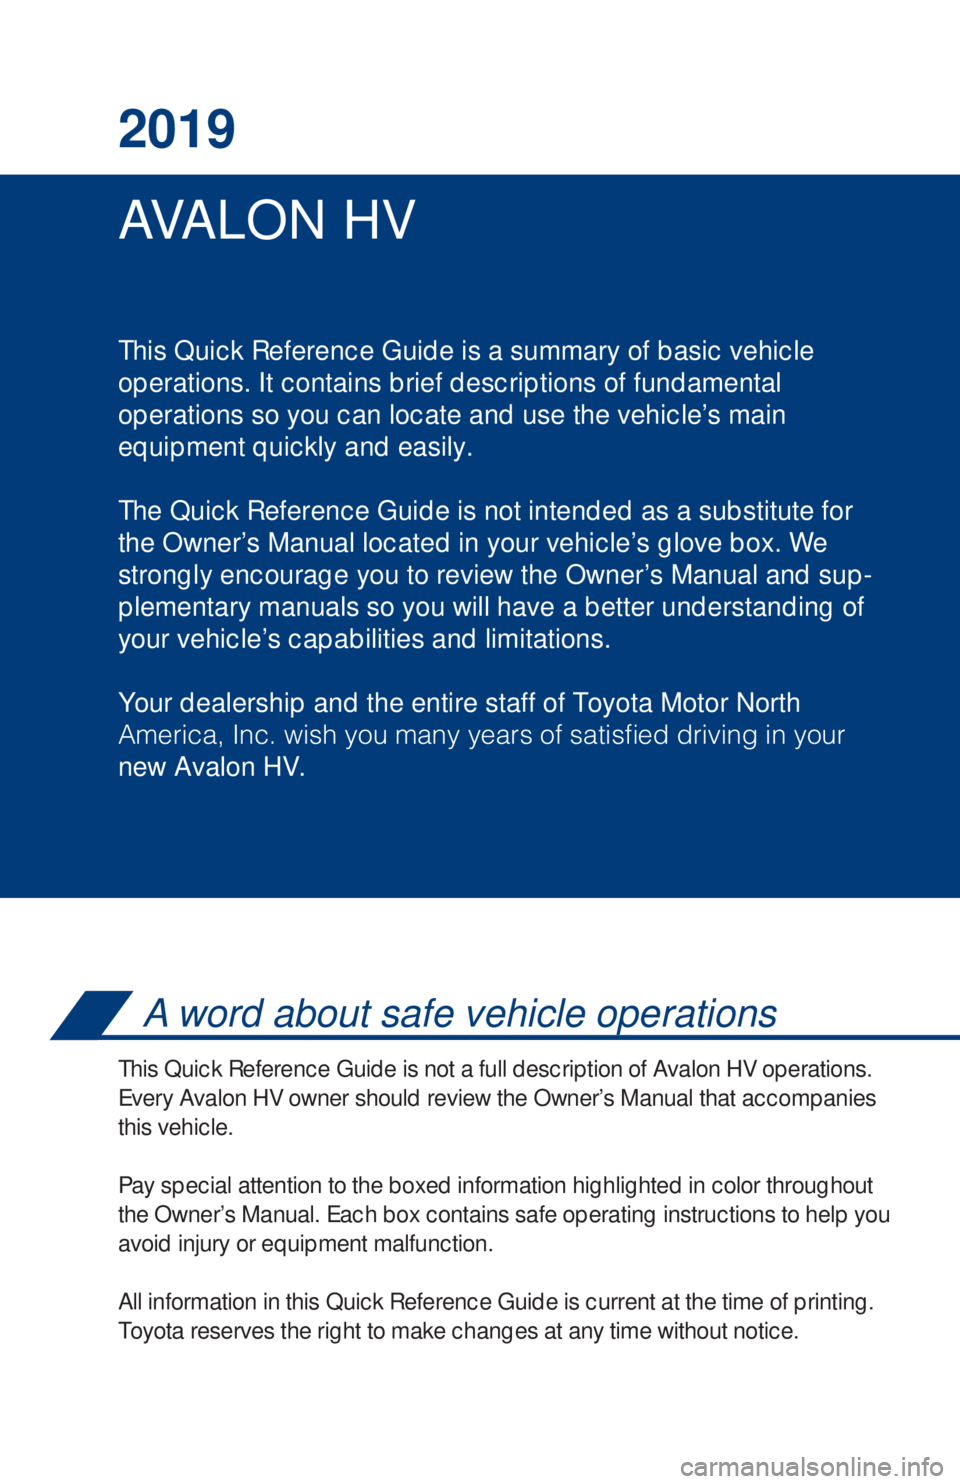 TOYOTA AVALON HYBRID 2019  Owners Manual (in English) AVA L O N  H V 2019
This Quick Reference Guide is a summary of basic vehicle
operations. It contains brief descriptions of fundamental
operations so you can locate and use the vehicle’s main 
equipm